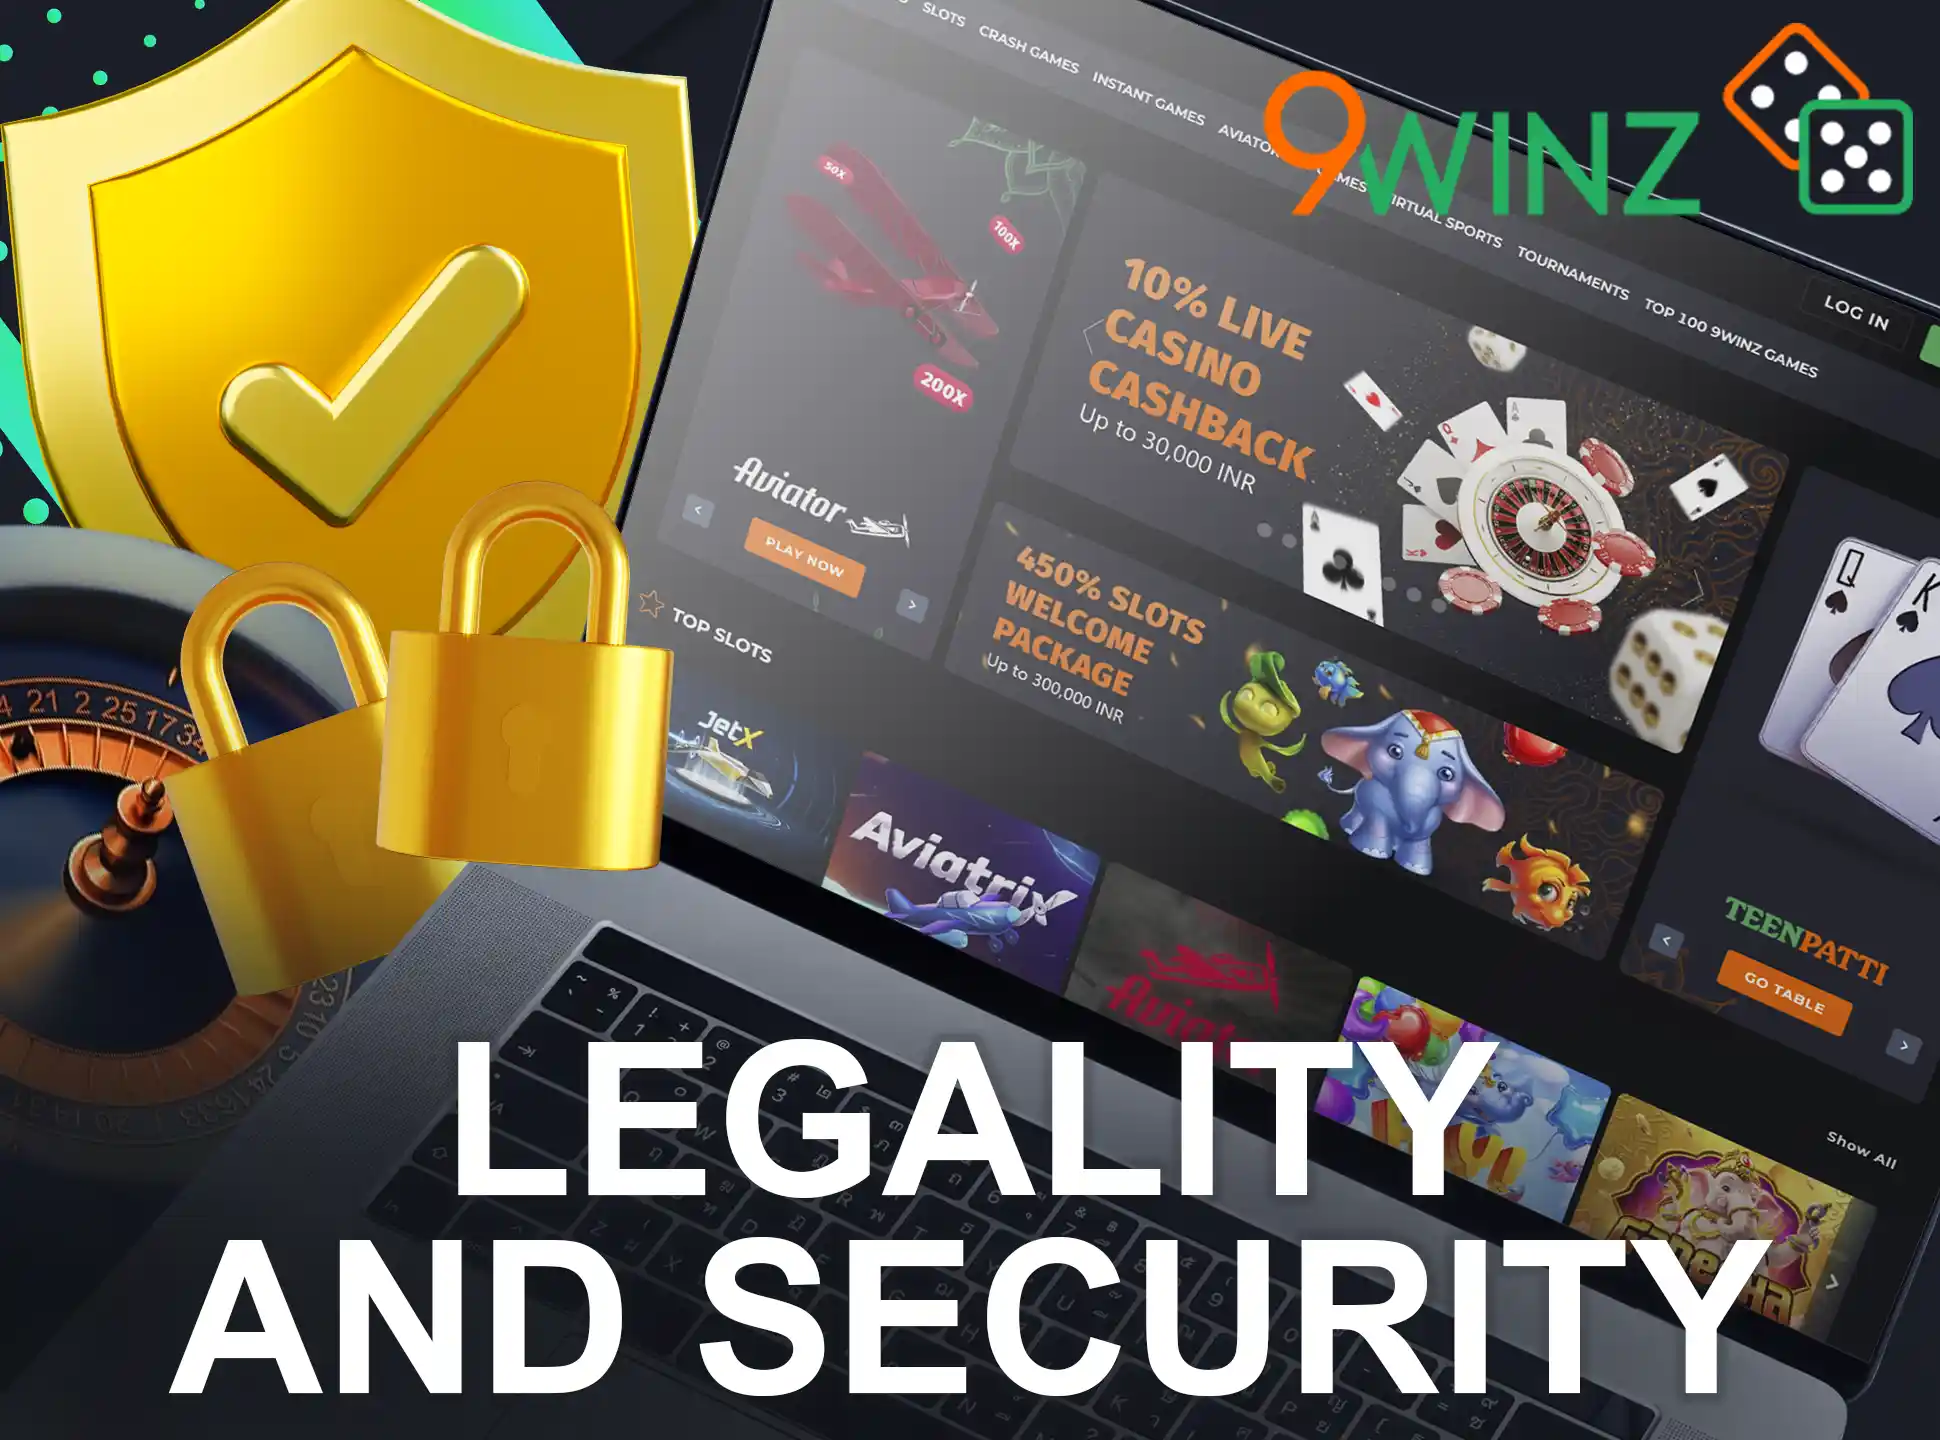 9winz has all of the required licenses.